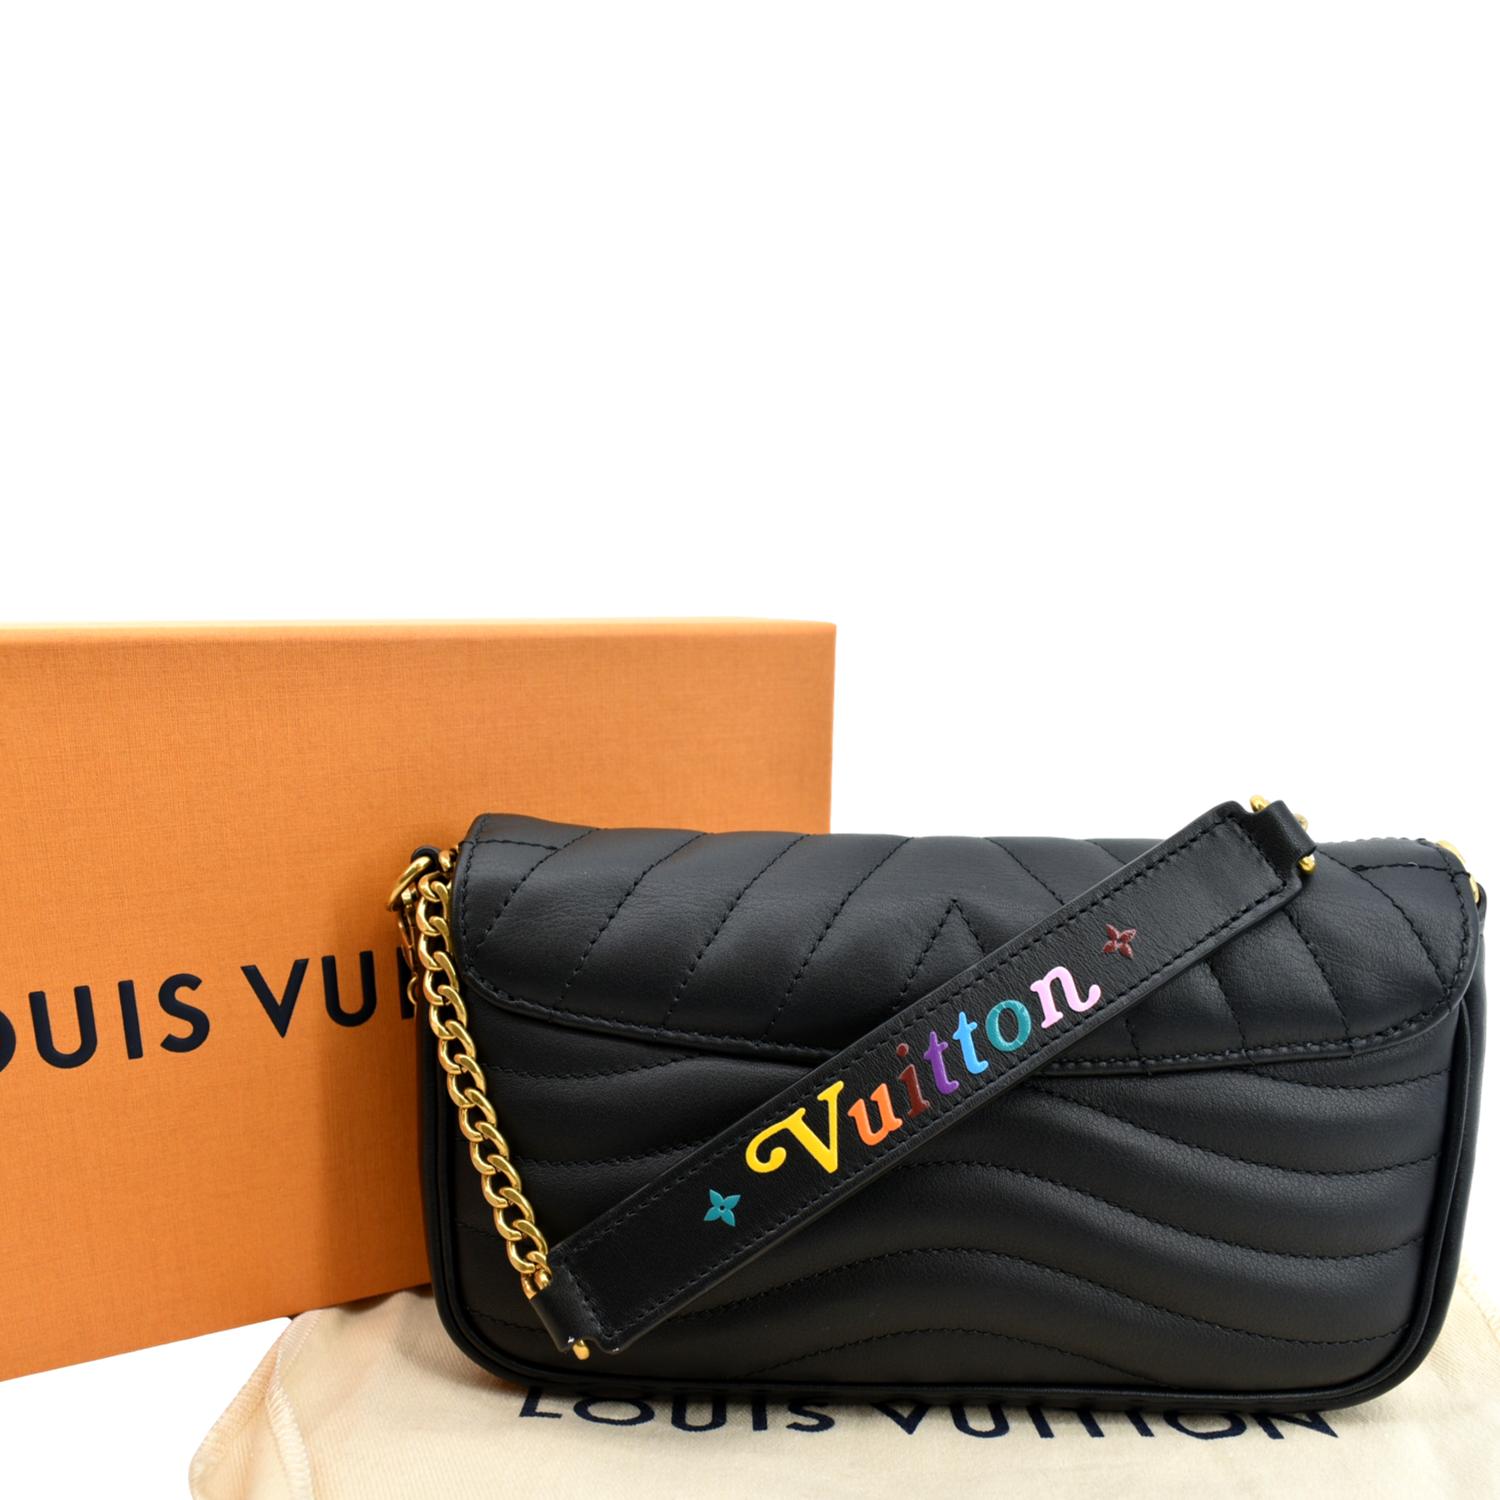 Louis Vuitton - New Wave Heart Bag- 100% Authentic - Light use for